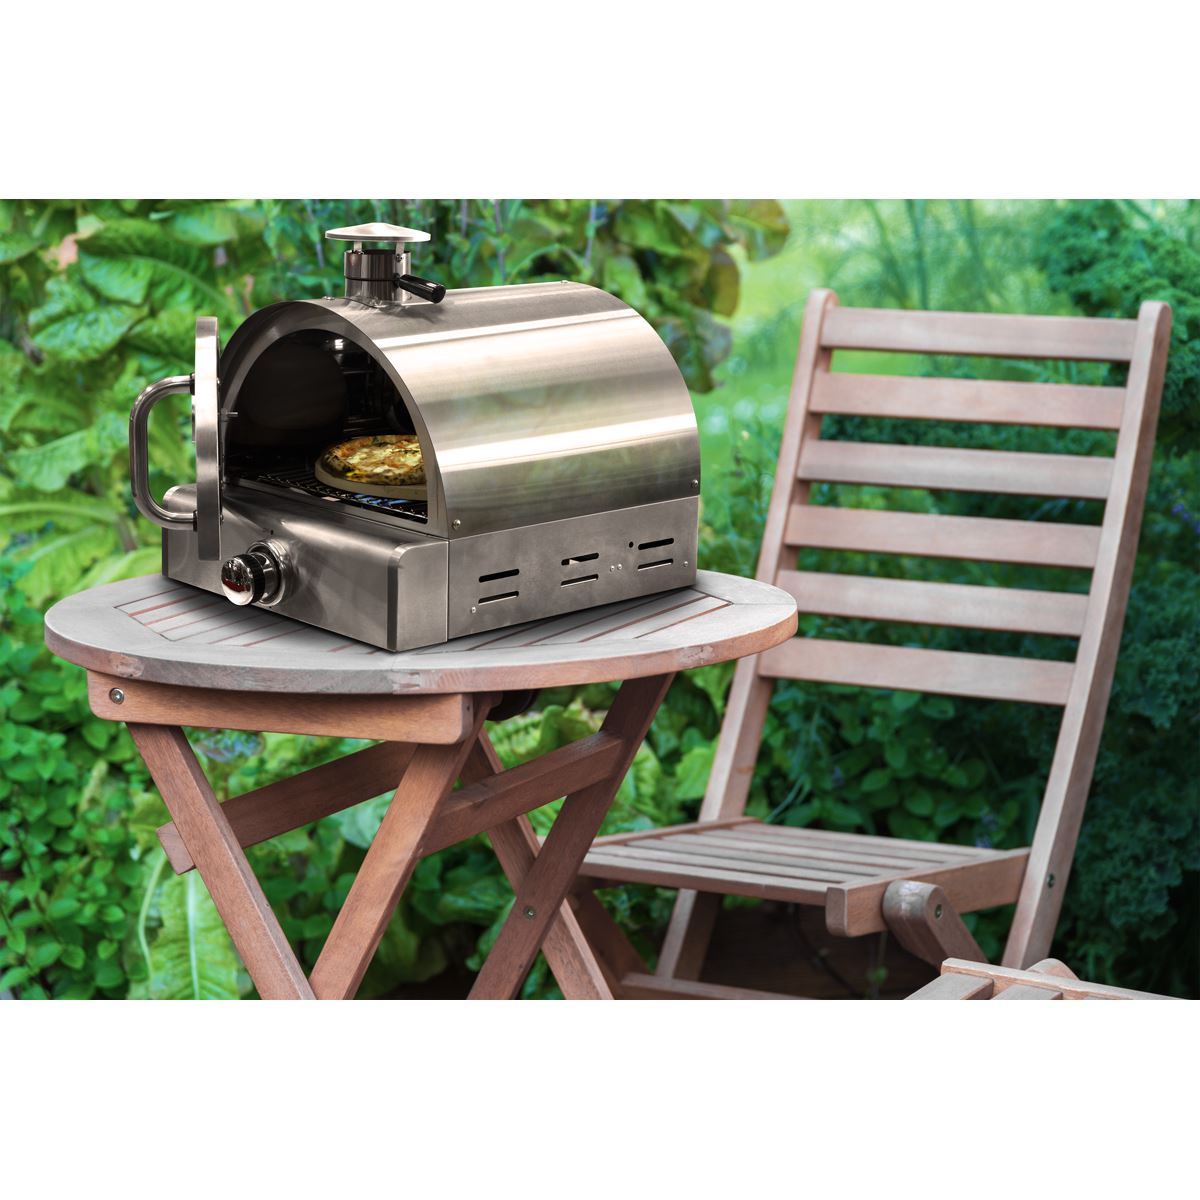 Dellonda Outdoor Tabletop Gas Powered Pizza Oven with Temperature Display - DG104